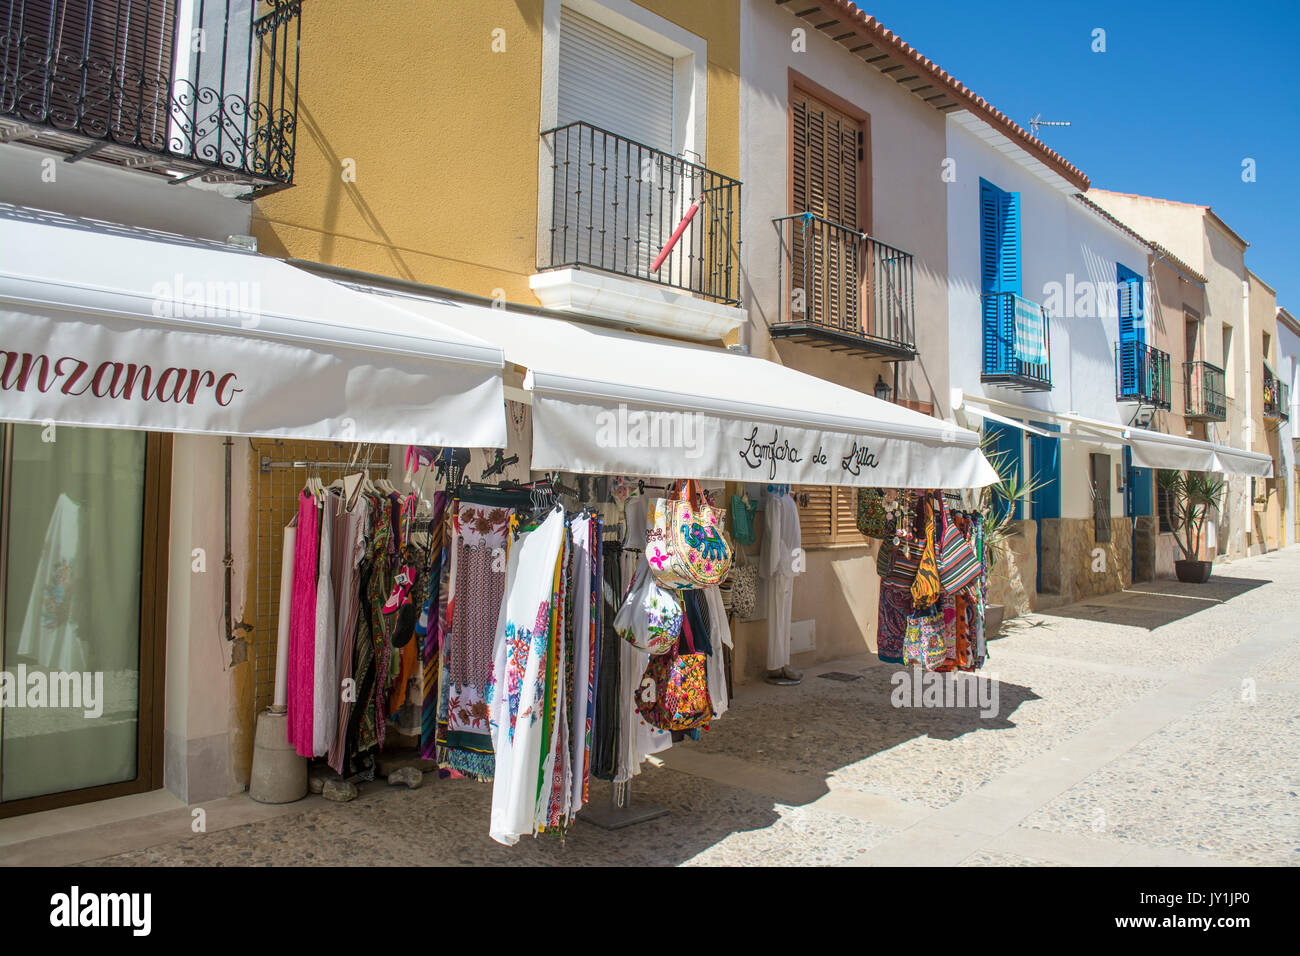 Shop front on the deserted main street of the Spanish island of Tabarca after the day trippers have departed, Alicante, Spain, Europe Stock Photo